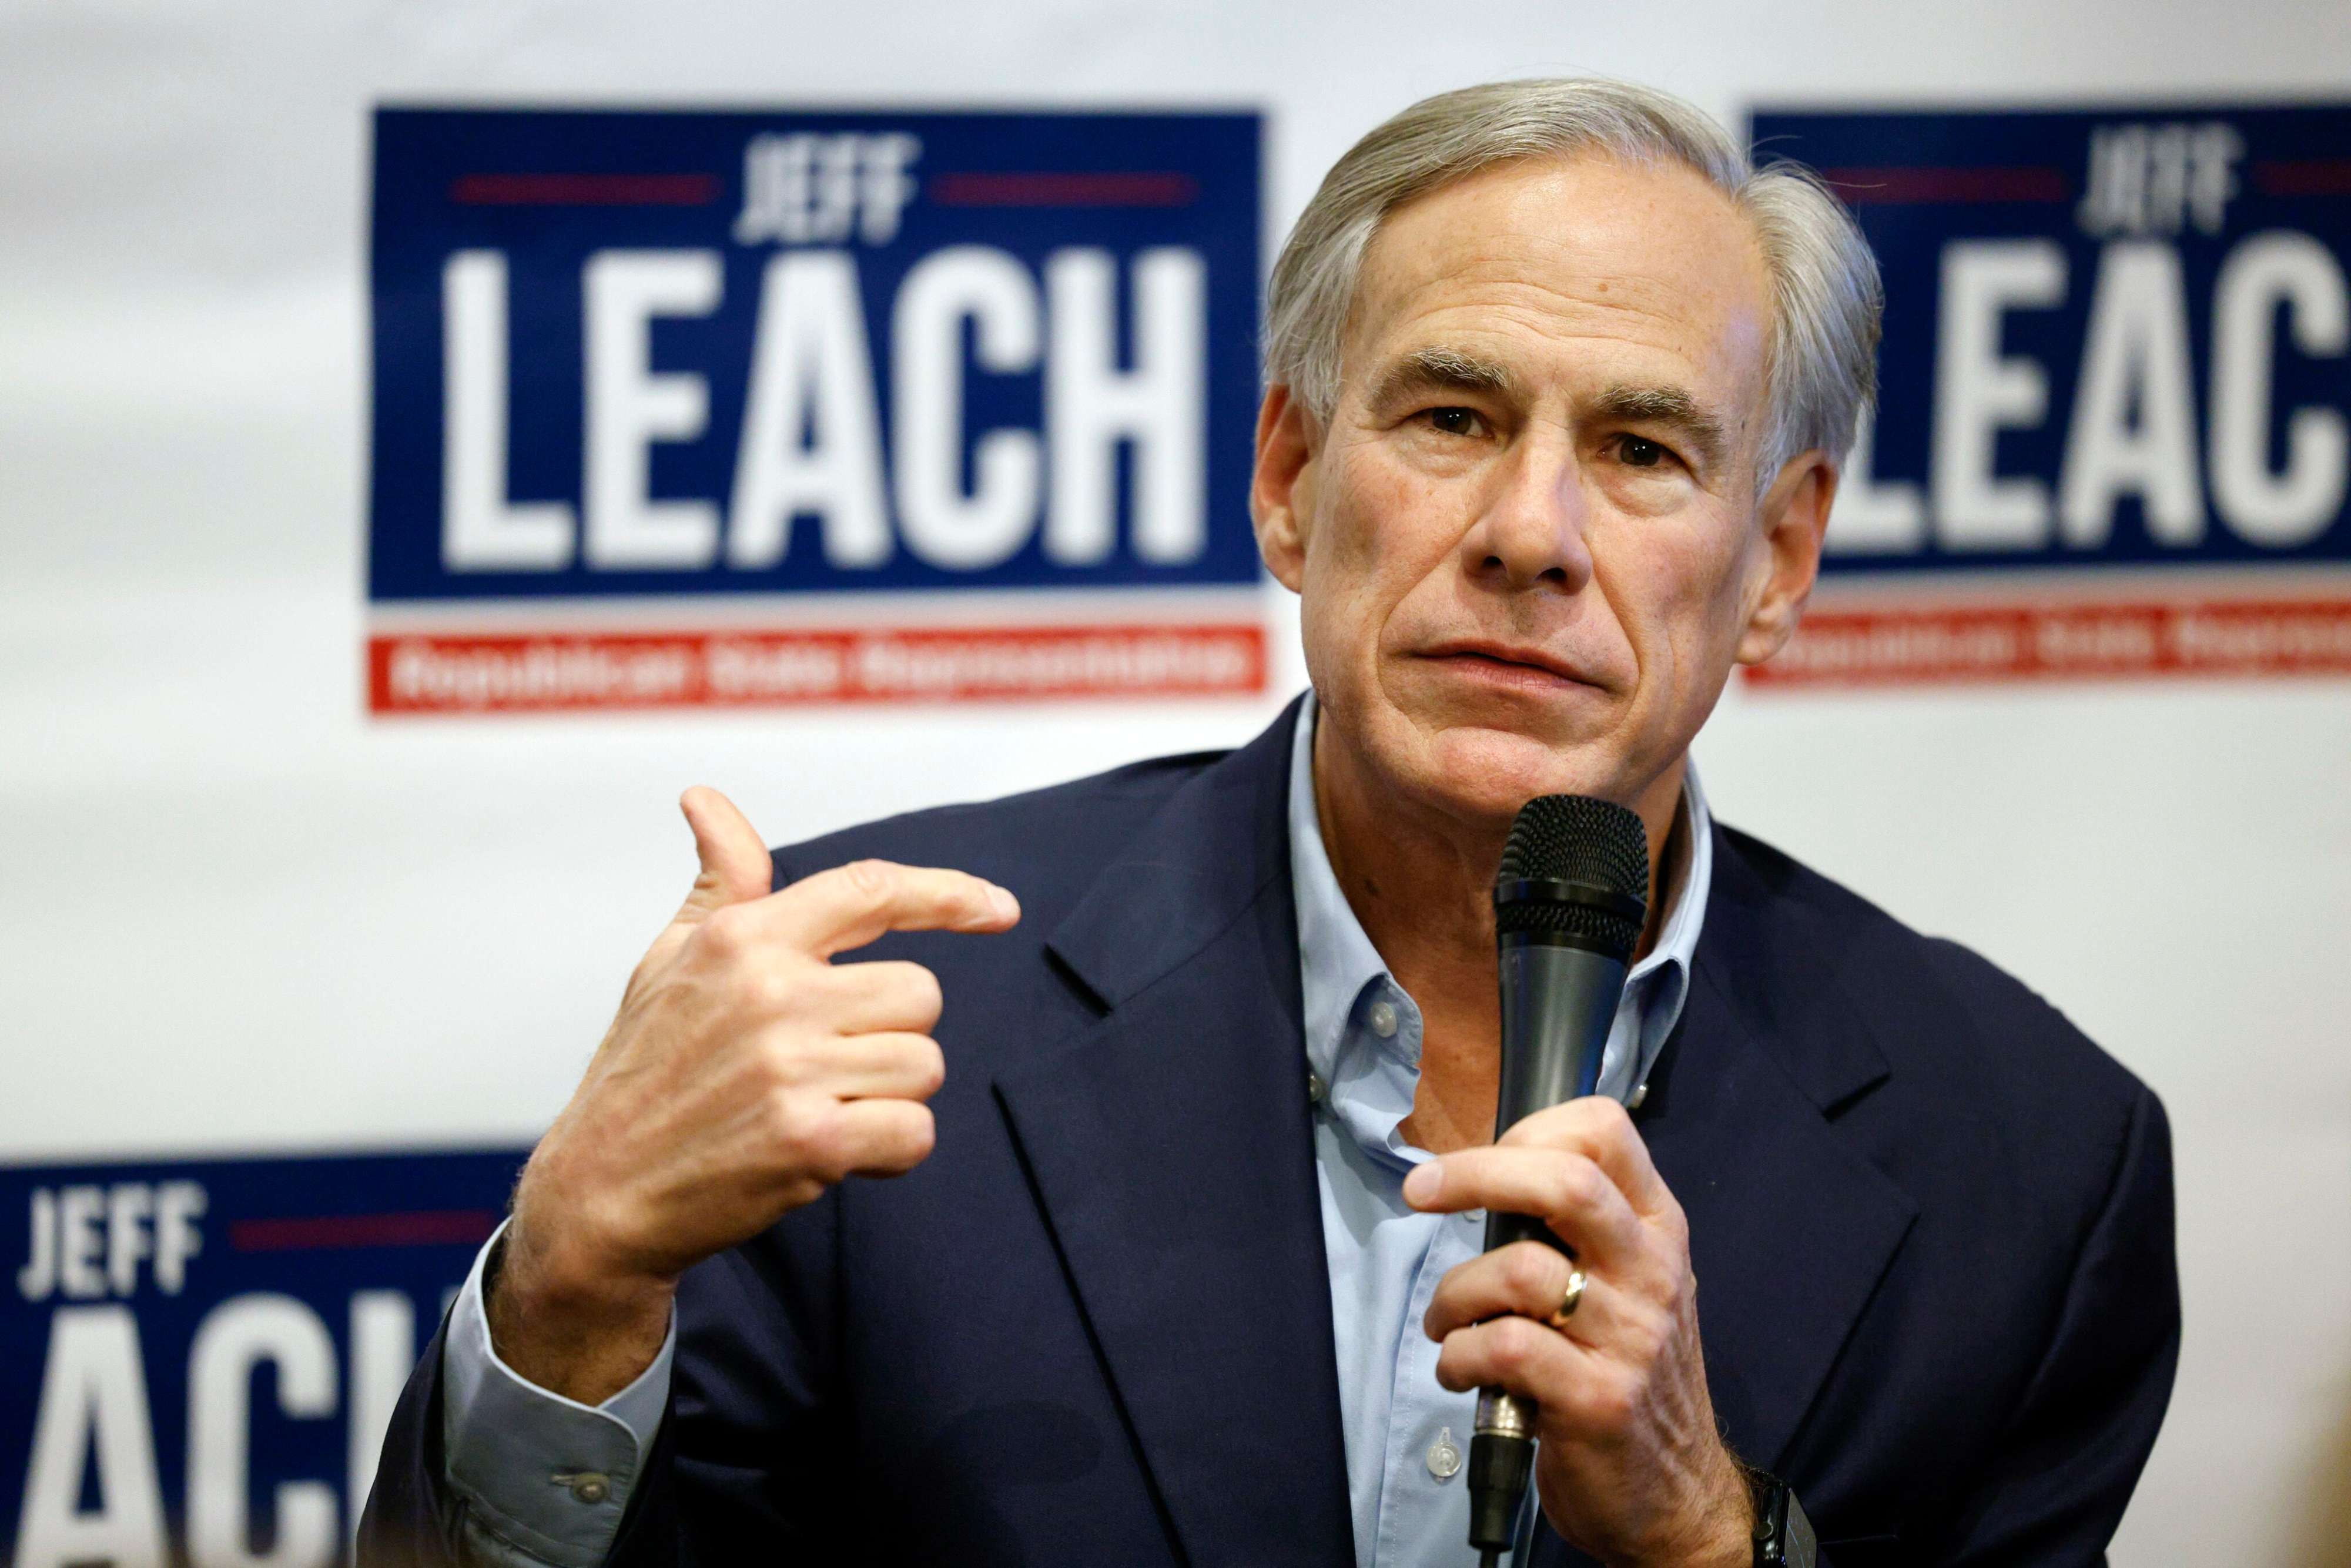 ken paxton wants revenge on impeachment supporters, but greg abbott stands in his way